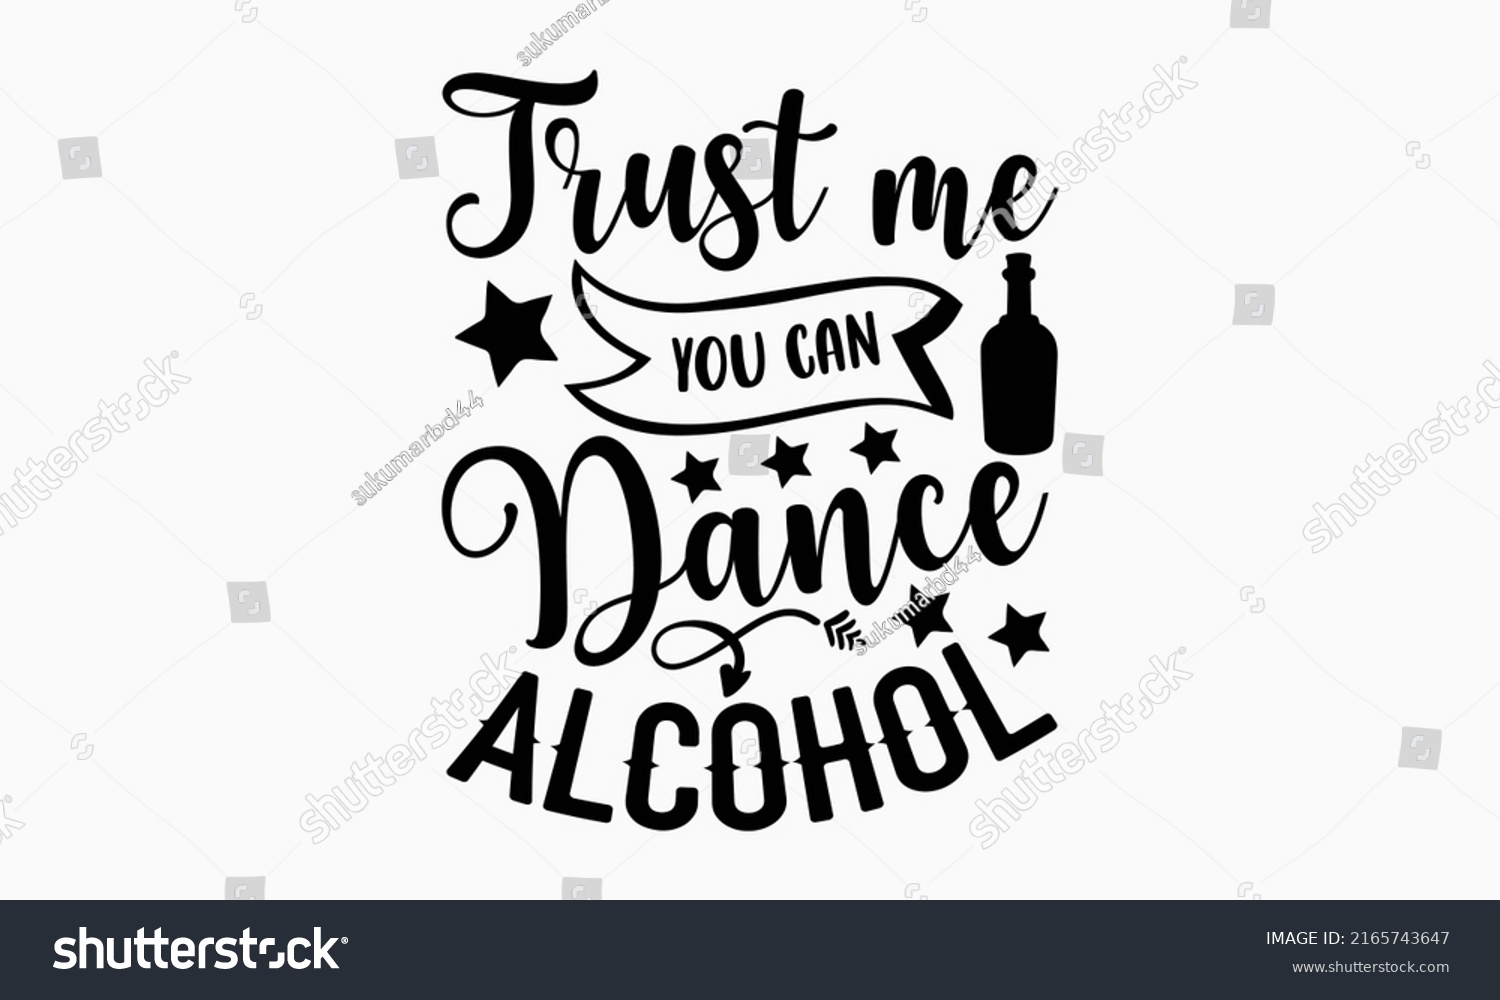 SVG of Trust me you can dance alcohol - Alcohol t shirt design, Hand drawn lettering phrase, Calligraphy graphic design, SVG Files for Cutting Cricut and Silhouette svg